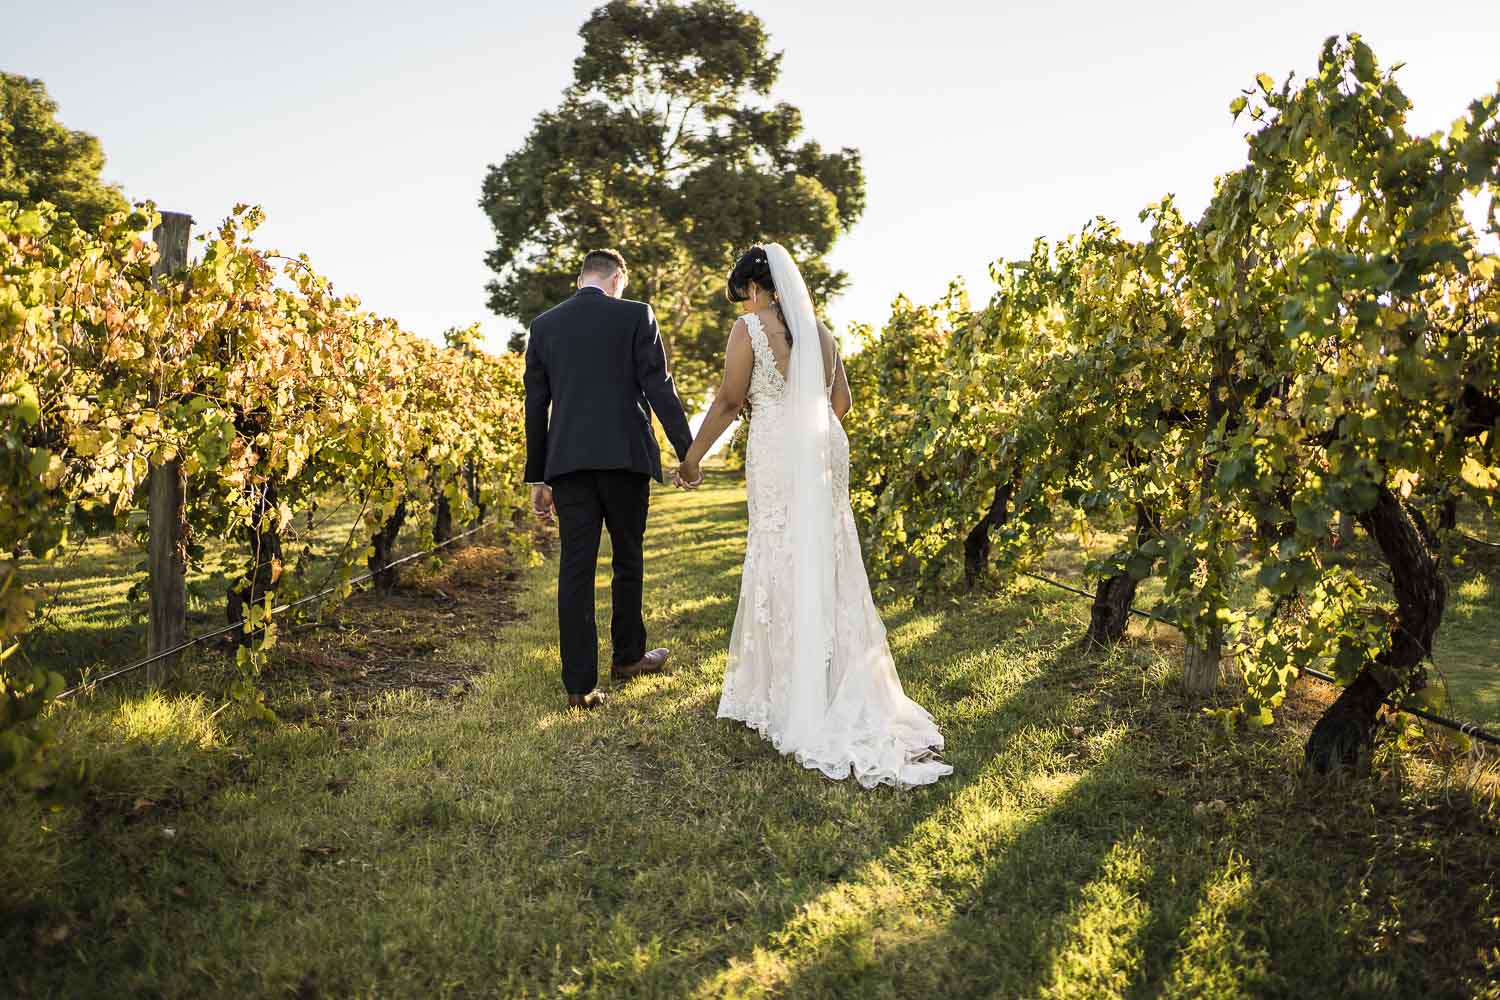 Weddings at Sandalford Winery in the vines